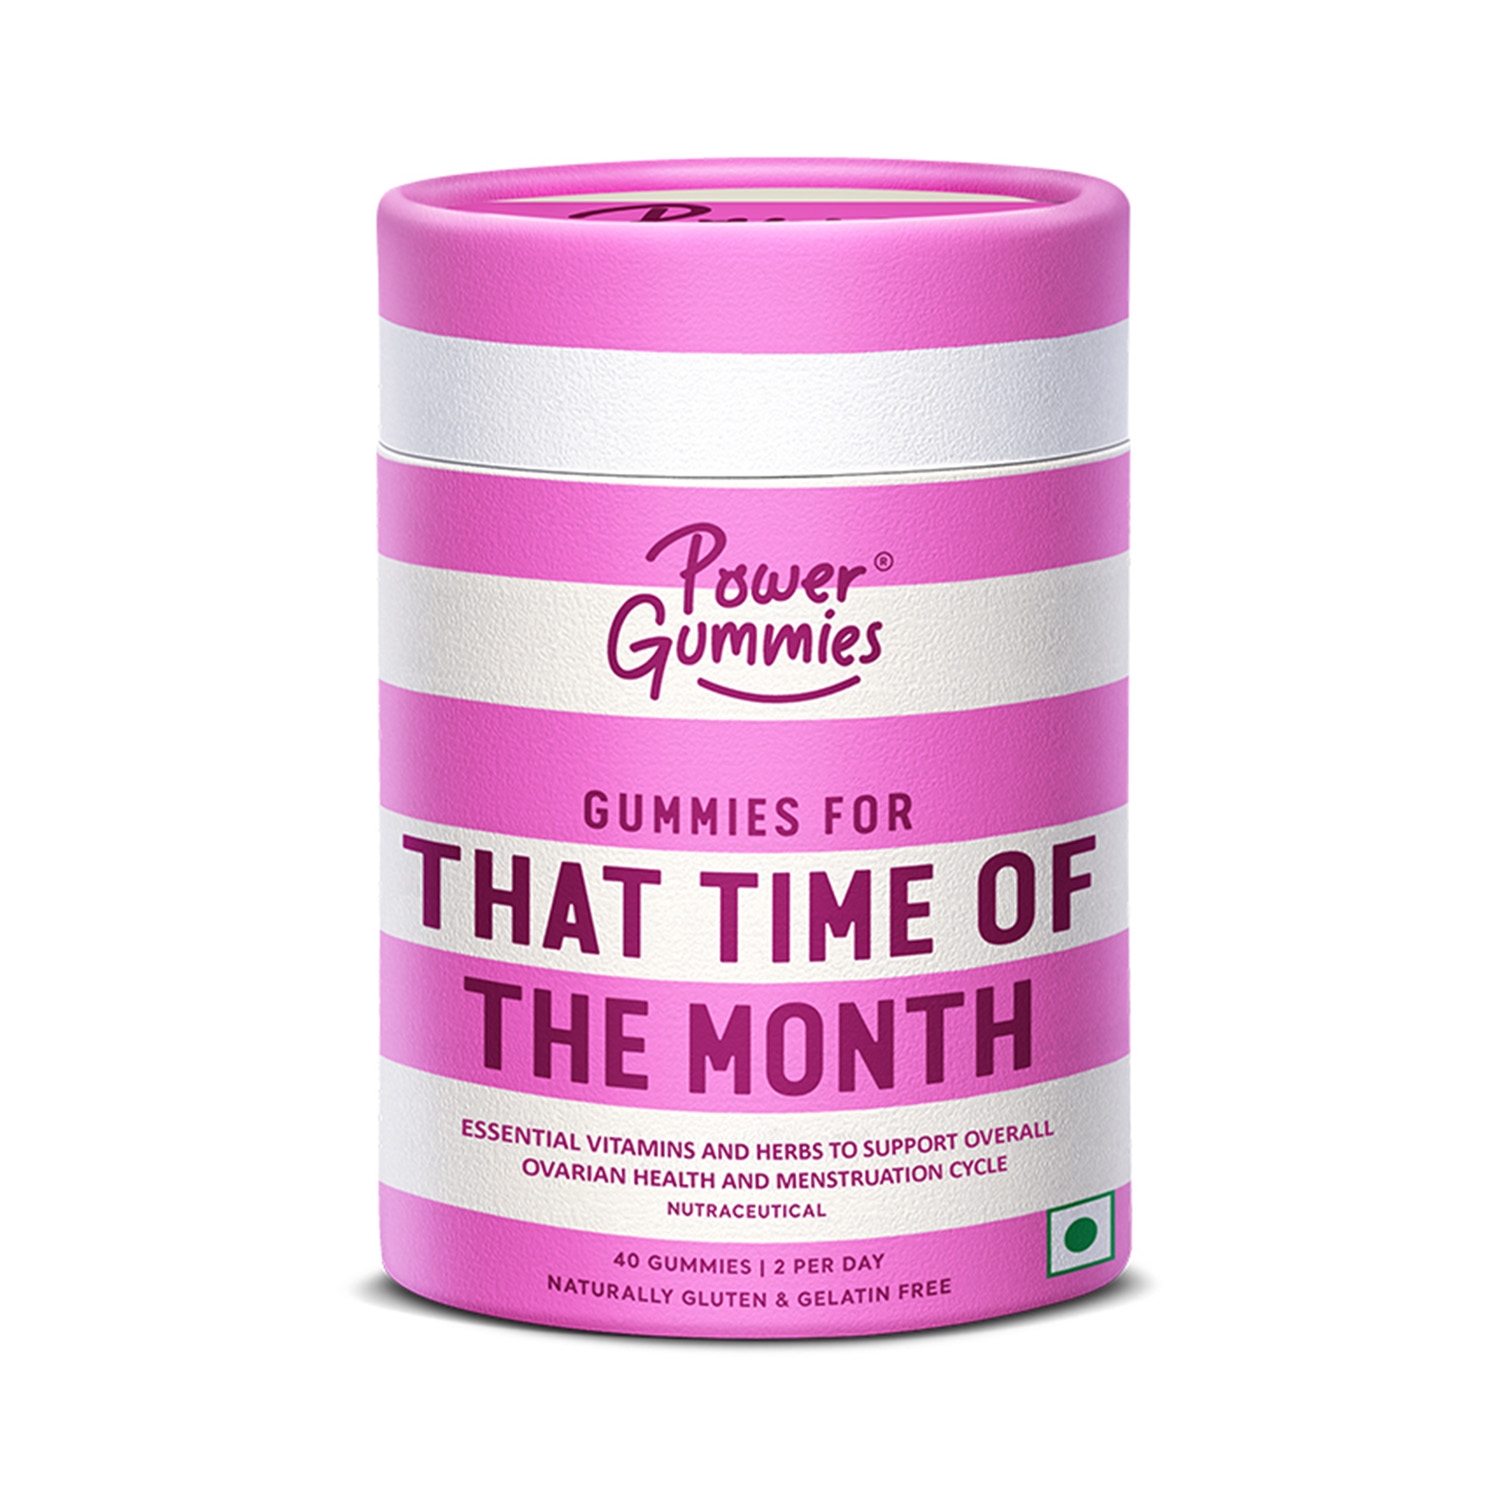 Power Gummies | Power Gummies for That Time of The Month - Period Pain Gummies (100g)